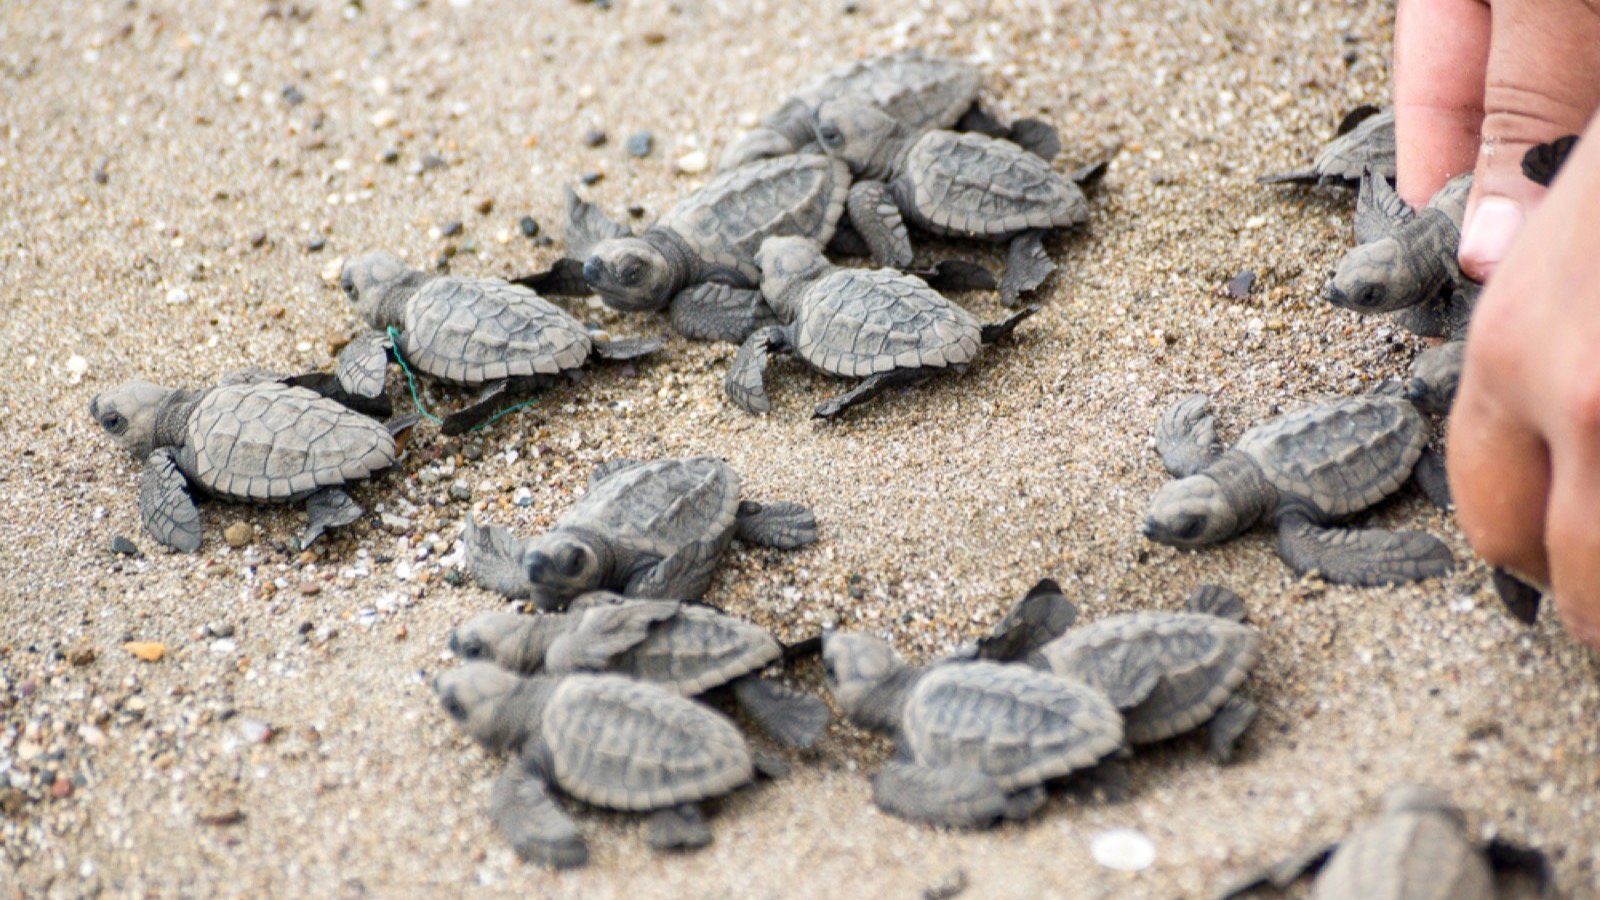 <p>For a delightful wildlife encounter, head to coastal Africa to watch turtles nesting and laying hundreds of eggs. Two popular locations are Sao Tome and Principe on the western coastline of equatorial Africa.</p><p>Between October and April, the turtles head inland to struggle up the beach in the dark to lay their eggs.</p>